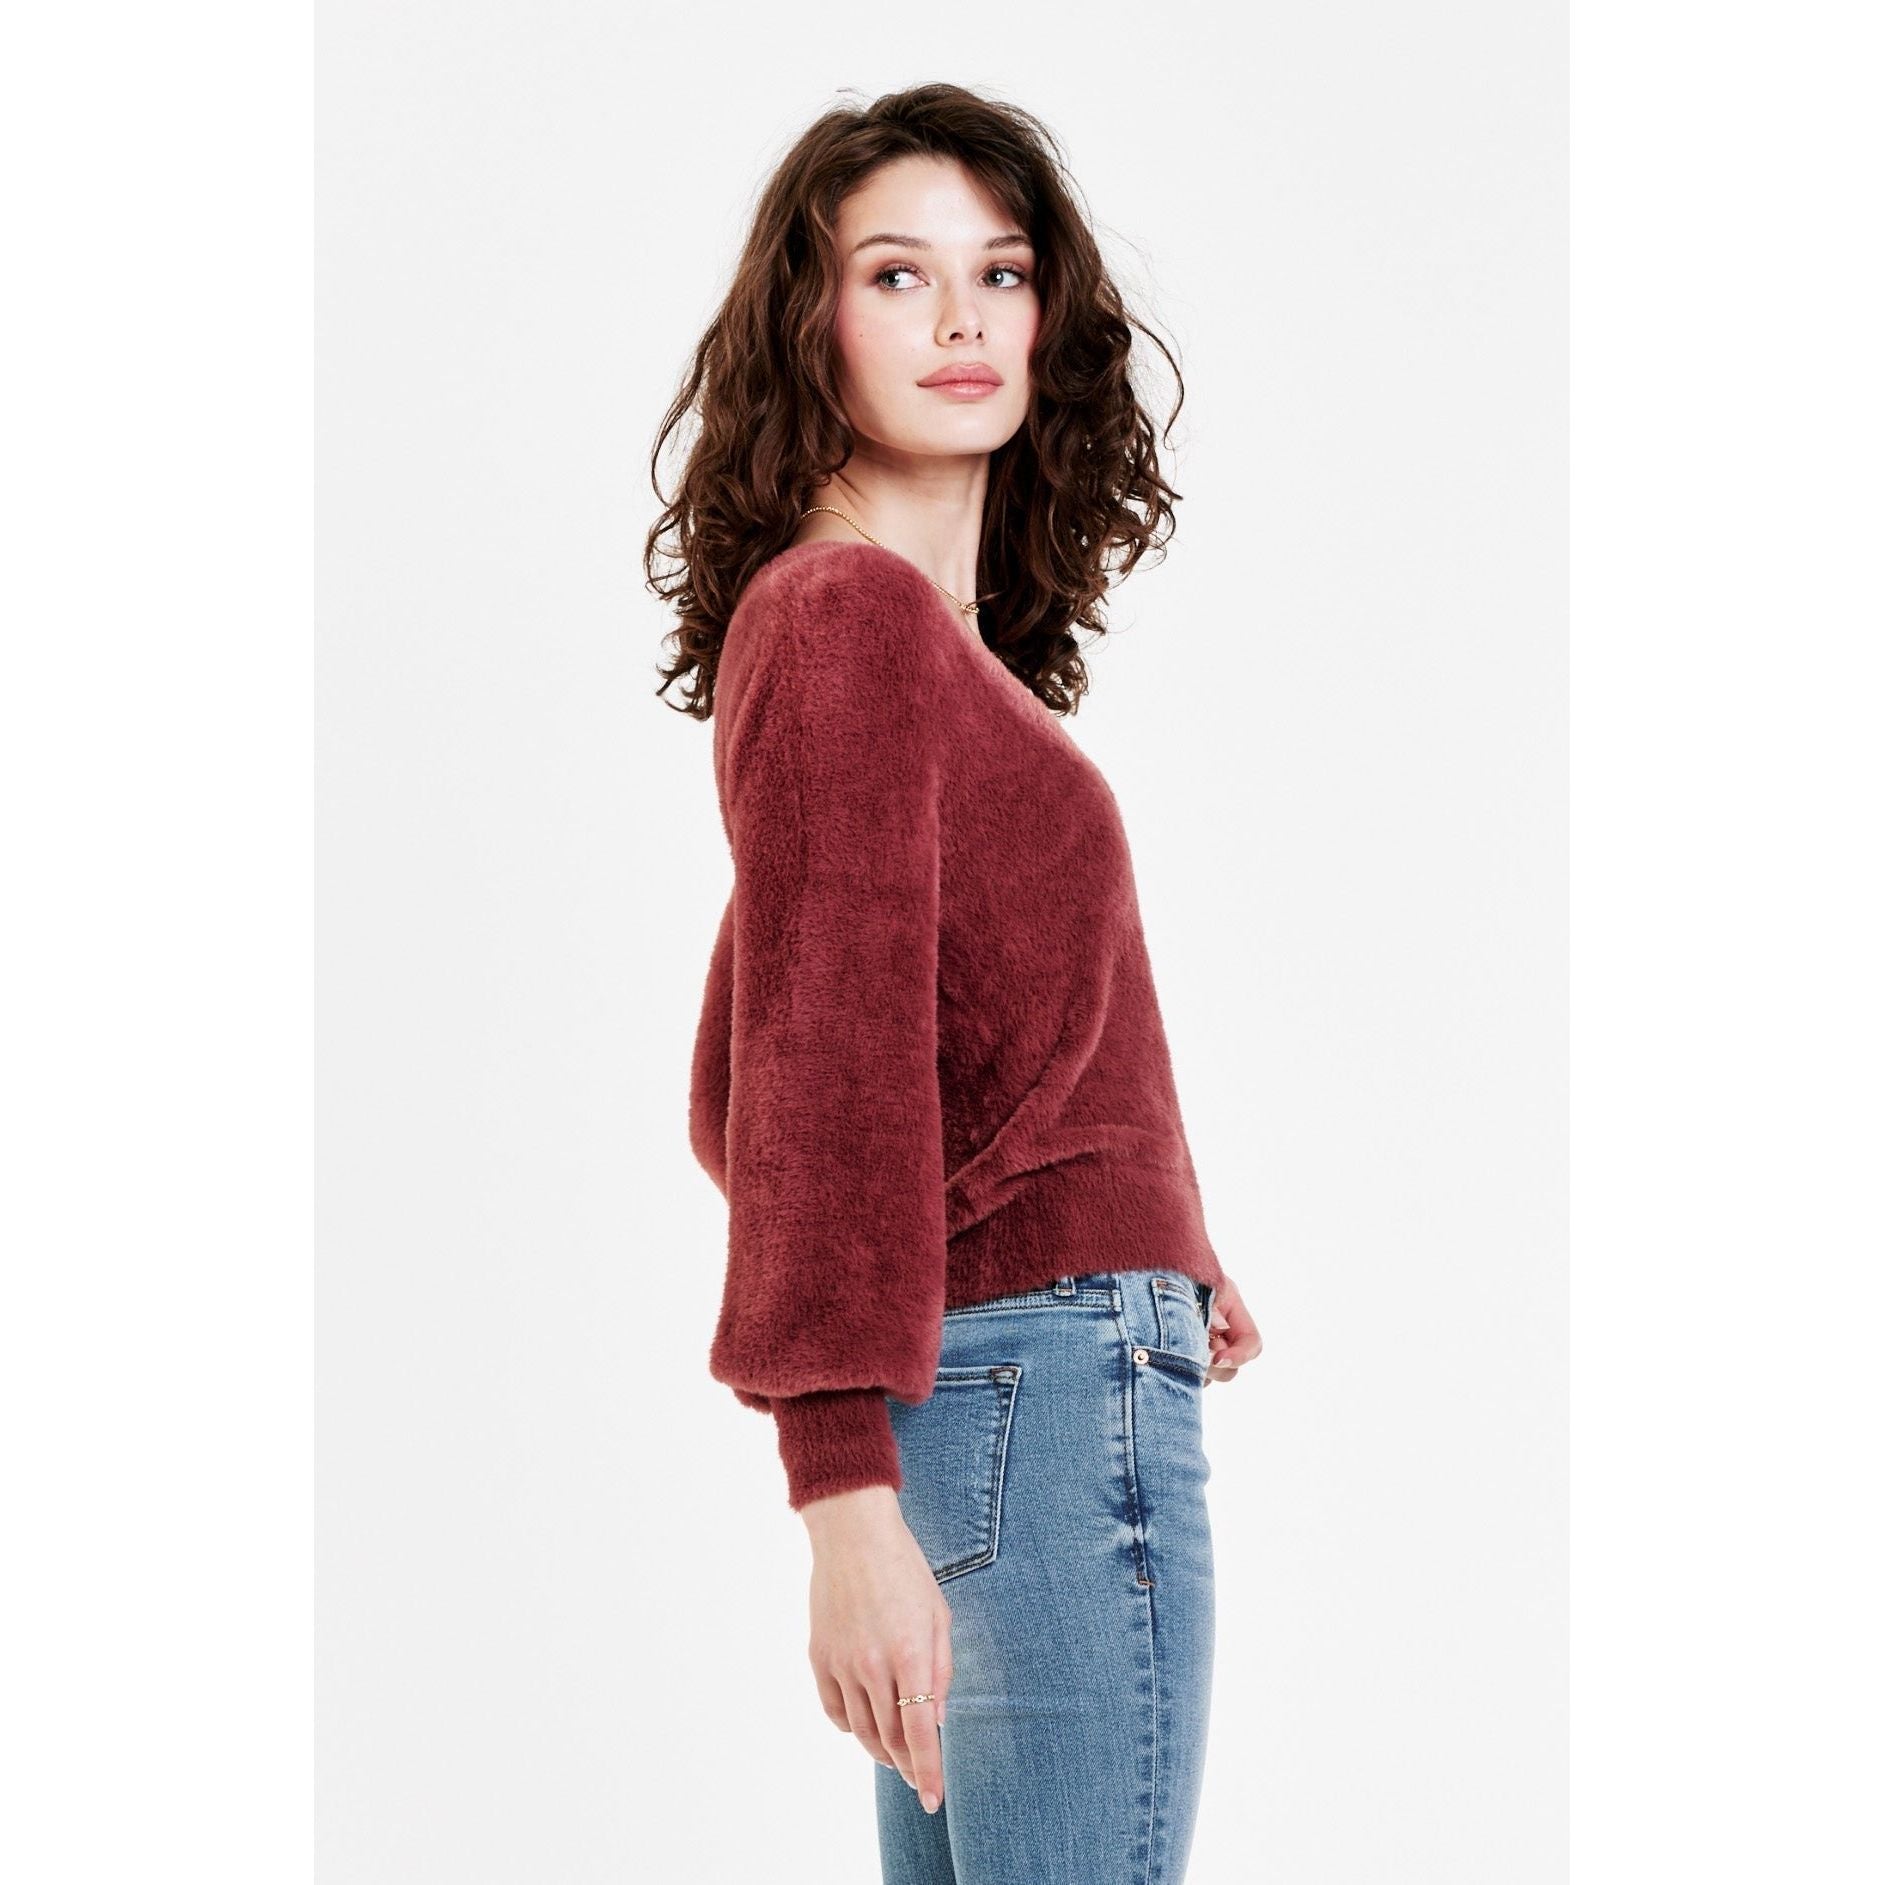 Dear John - Valli Plush Sweater in Withered Rose-SQ2036152